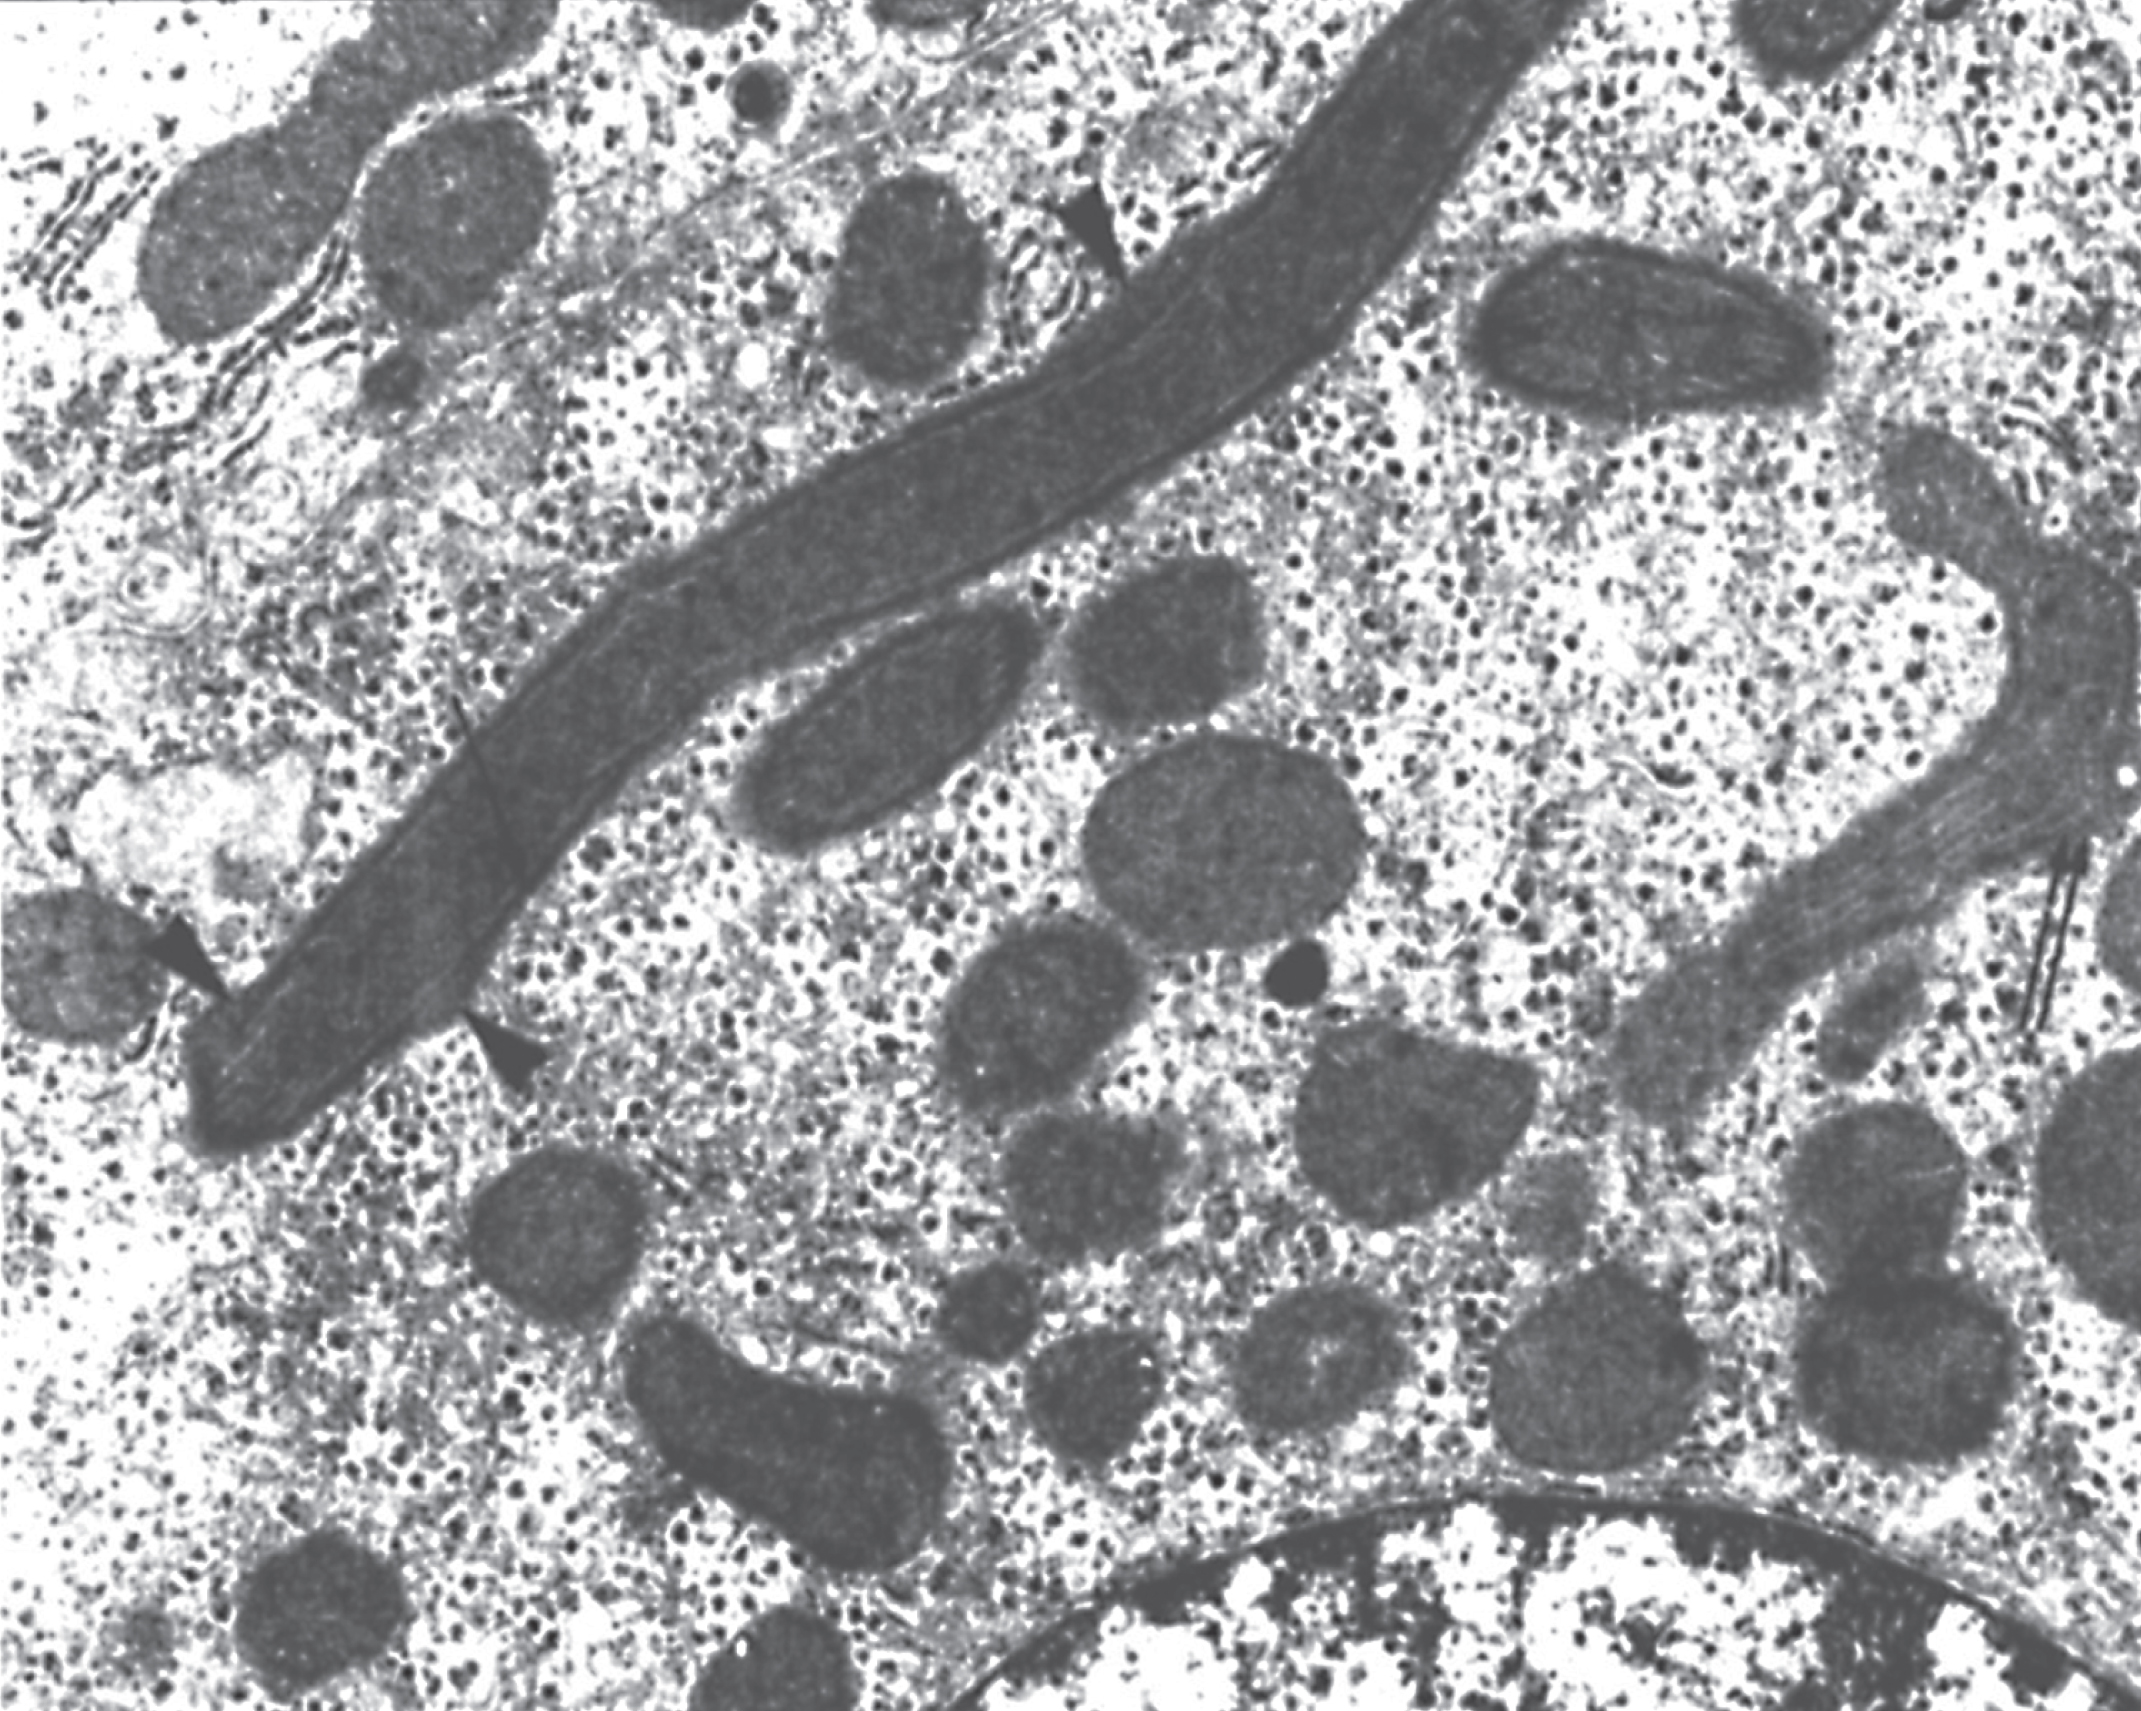 HHH syndrome. Increased number of mitochondria in the perinuclear region of a hepatocyte display altered forms and length. The long forms show tubules running parallel to the longitudinal axis, a thick structure applied to the inner mitochondria memberane (arrow) with sieve-like appearance on a slightly tangential cut (double arrow), and several small bulges protruding from the surface (arrowheads). Note the peripheral arrangement of the tubules on cross-sections. (Courtesy of Dr. M. Daria Haust.)